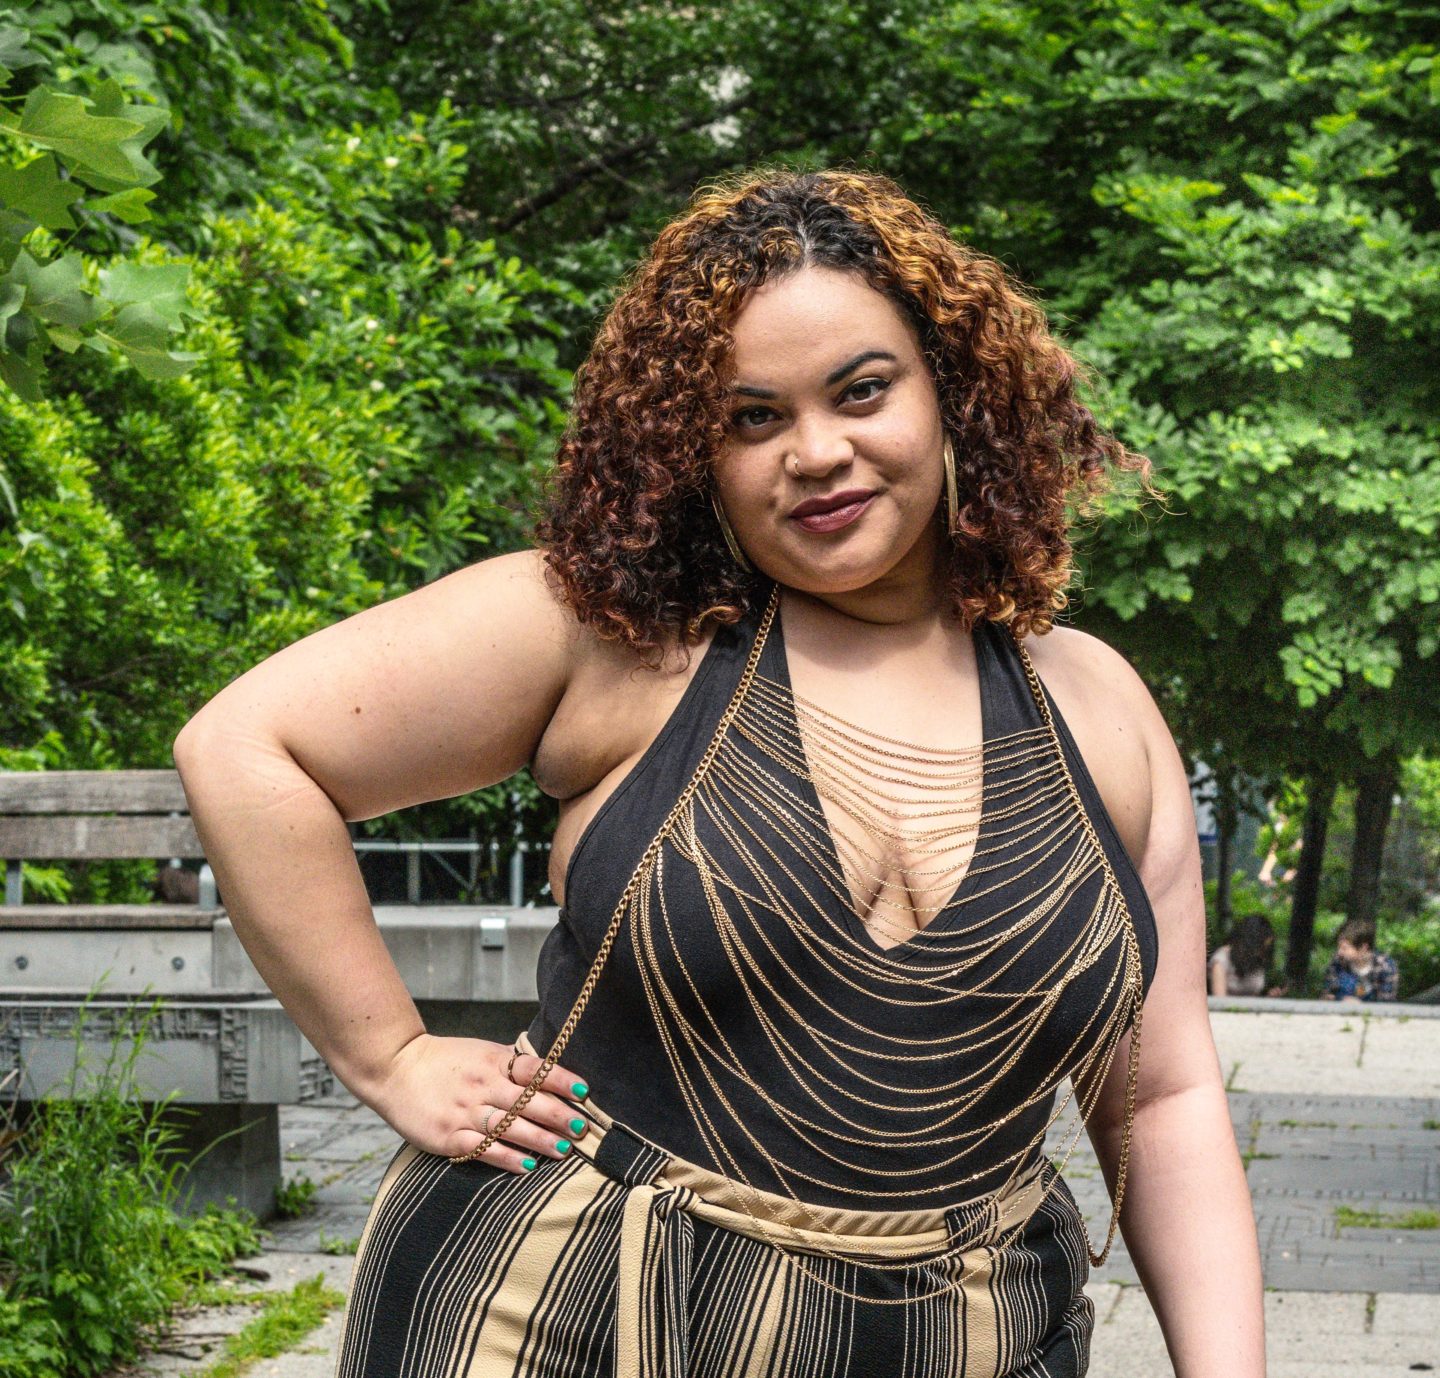 11 Body Chain with Dress Outfits to Try Out, Stat